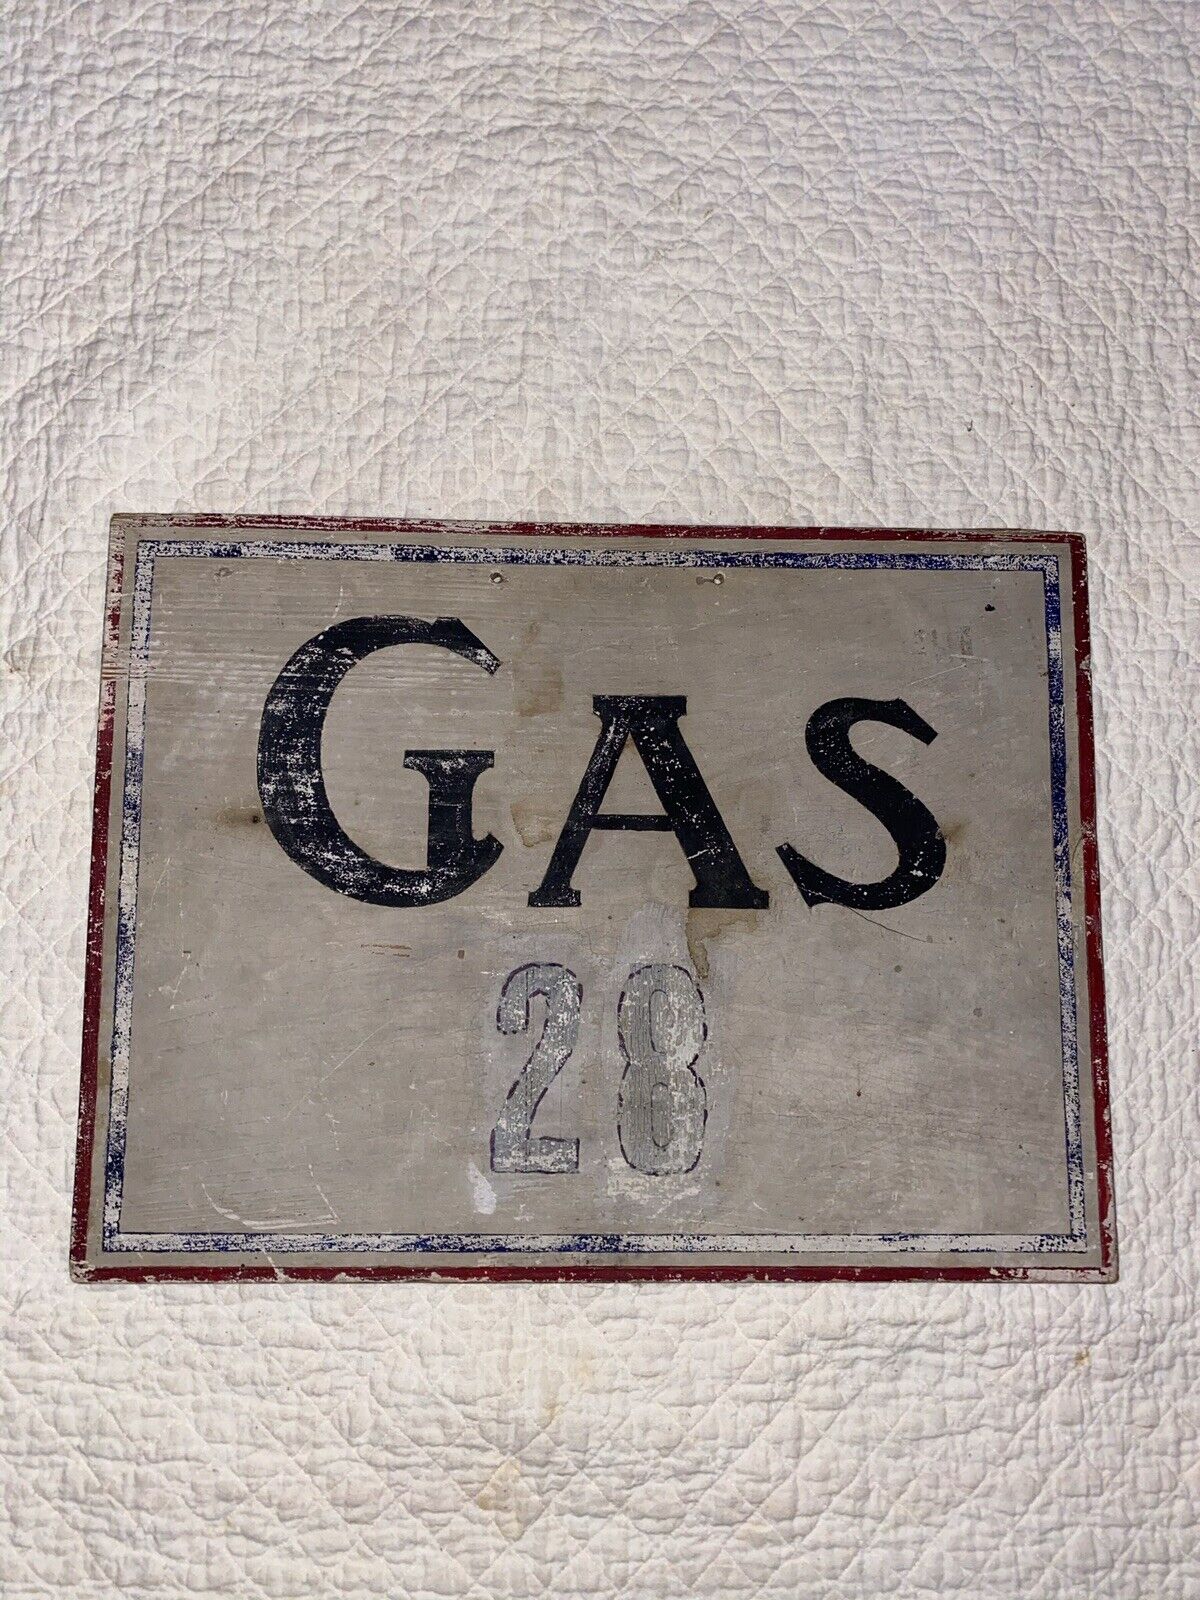 Old Primitive New England Painted “Gas” Sign